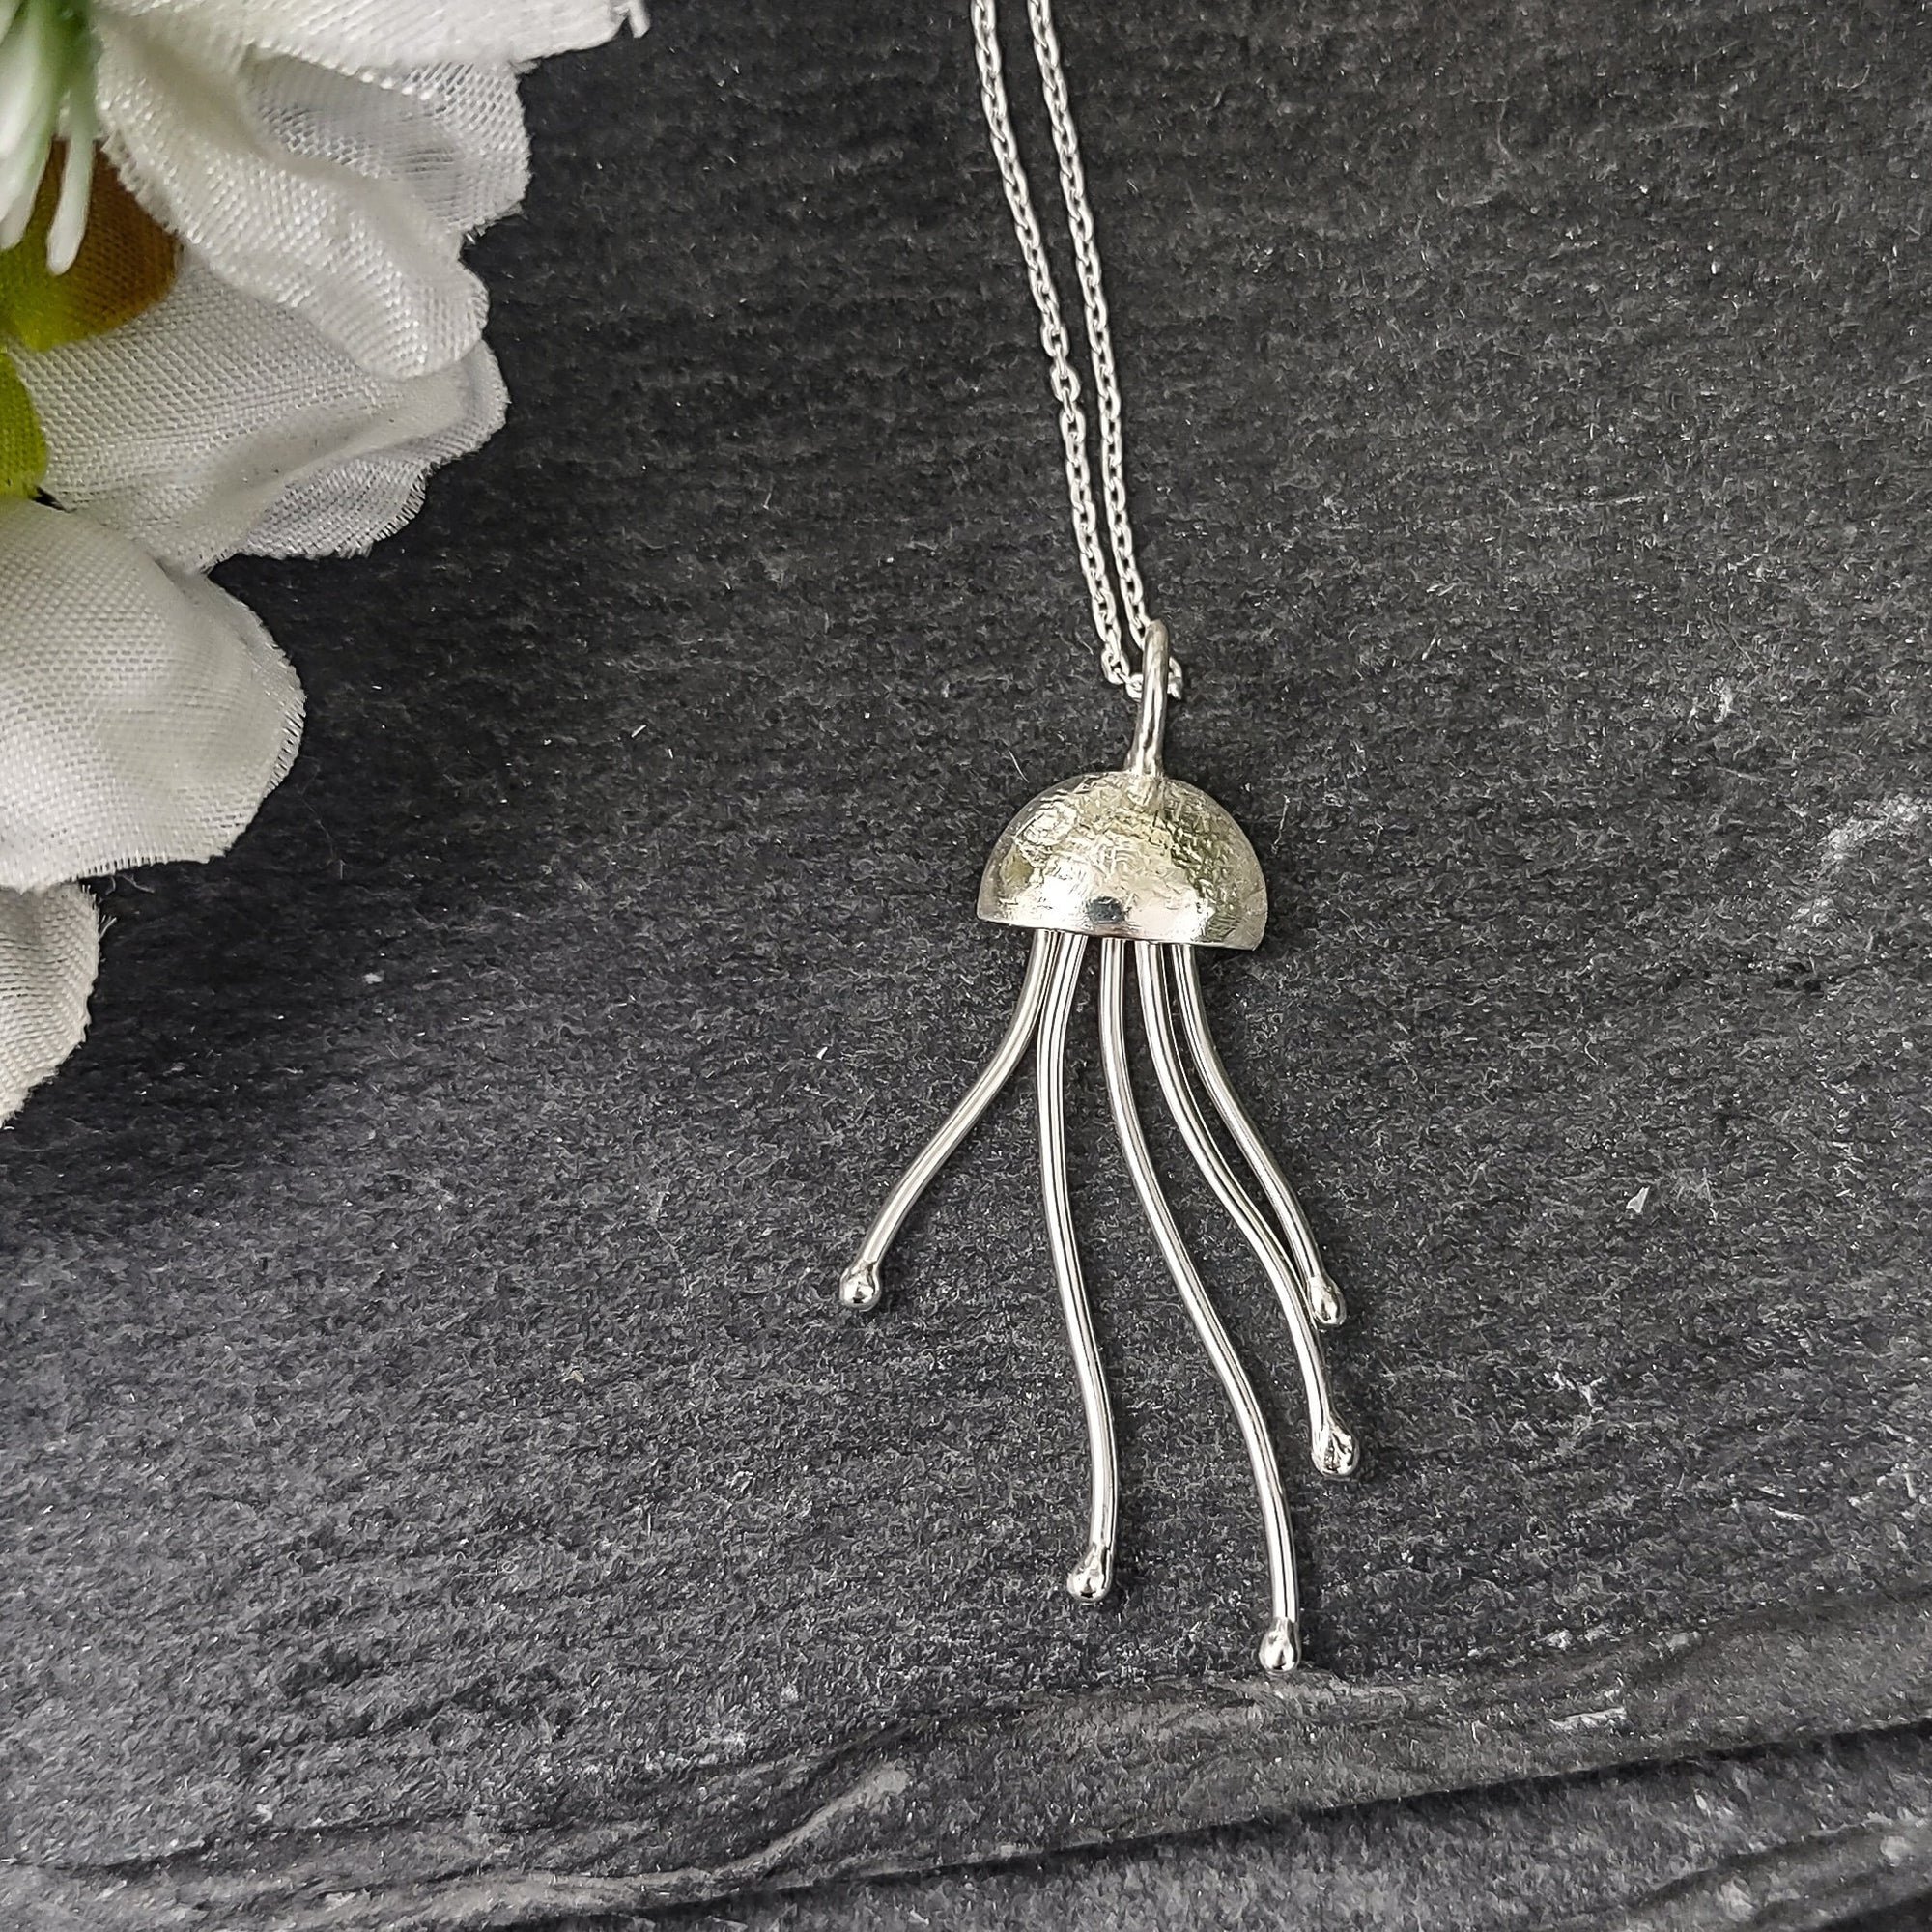 Small Jellyfish Pendant in Sterling Silver